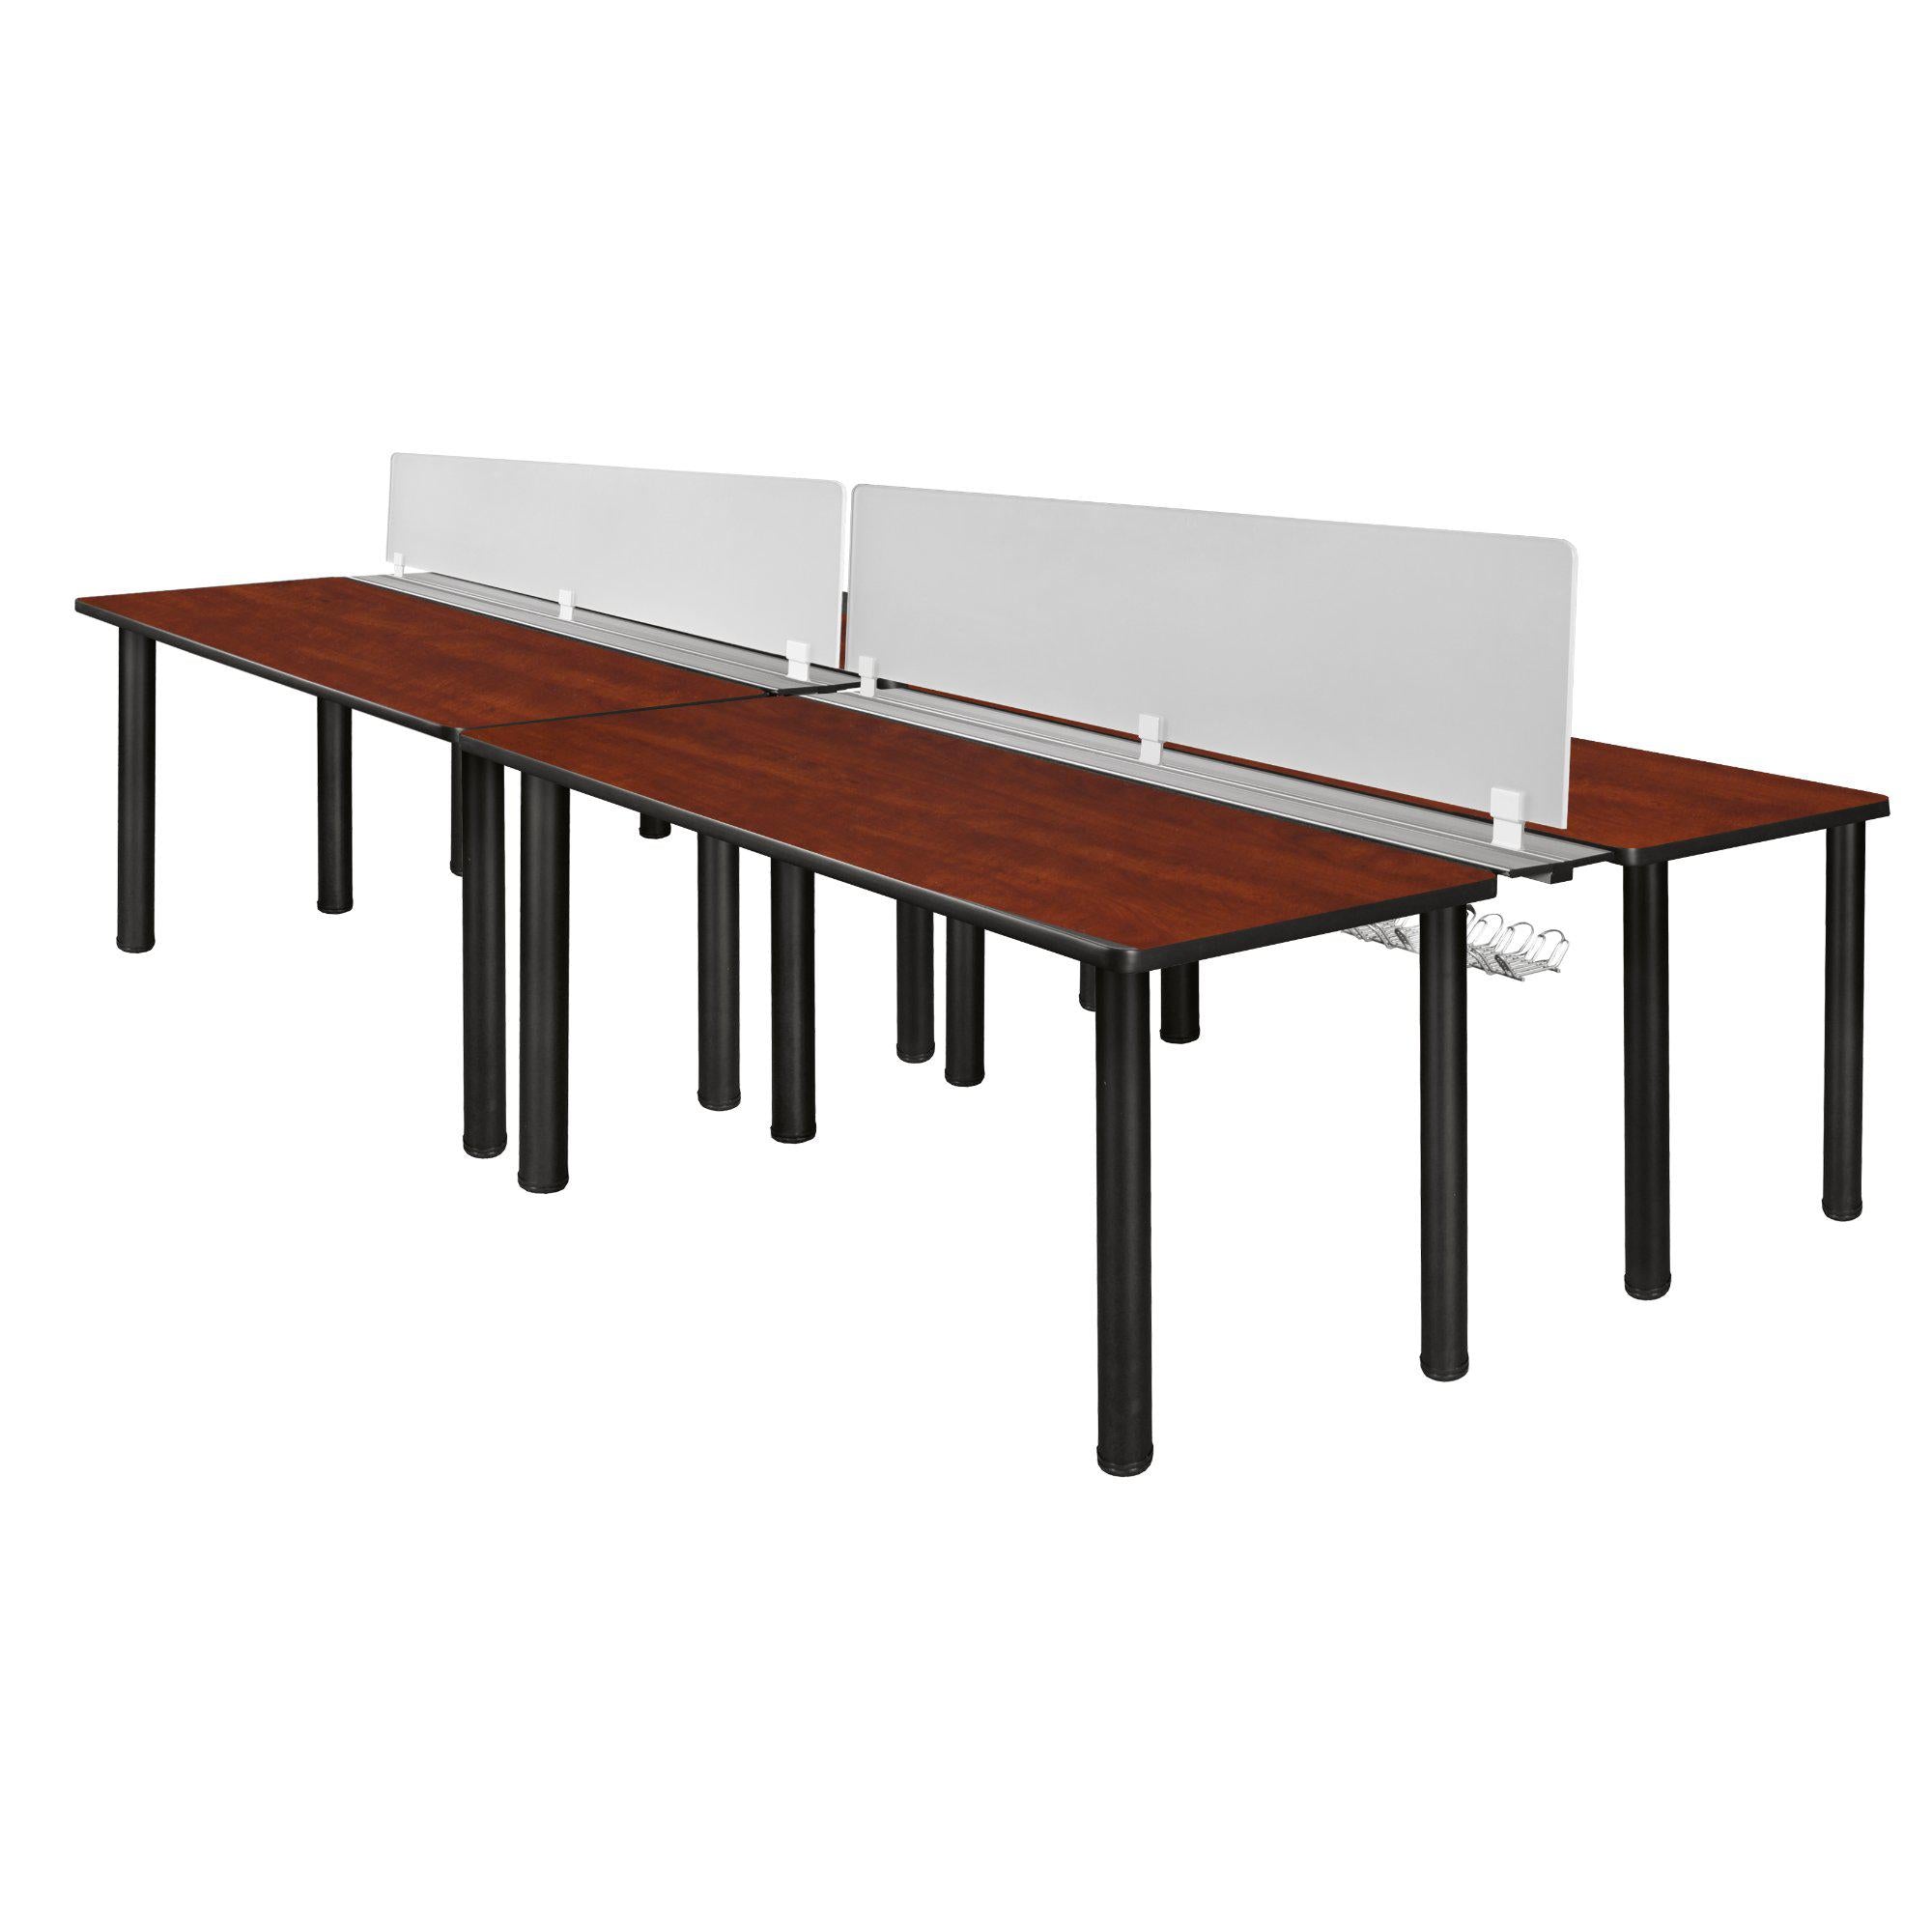 Kee 120" x 58" Double Benching System with Privacy Divider